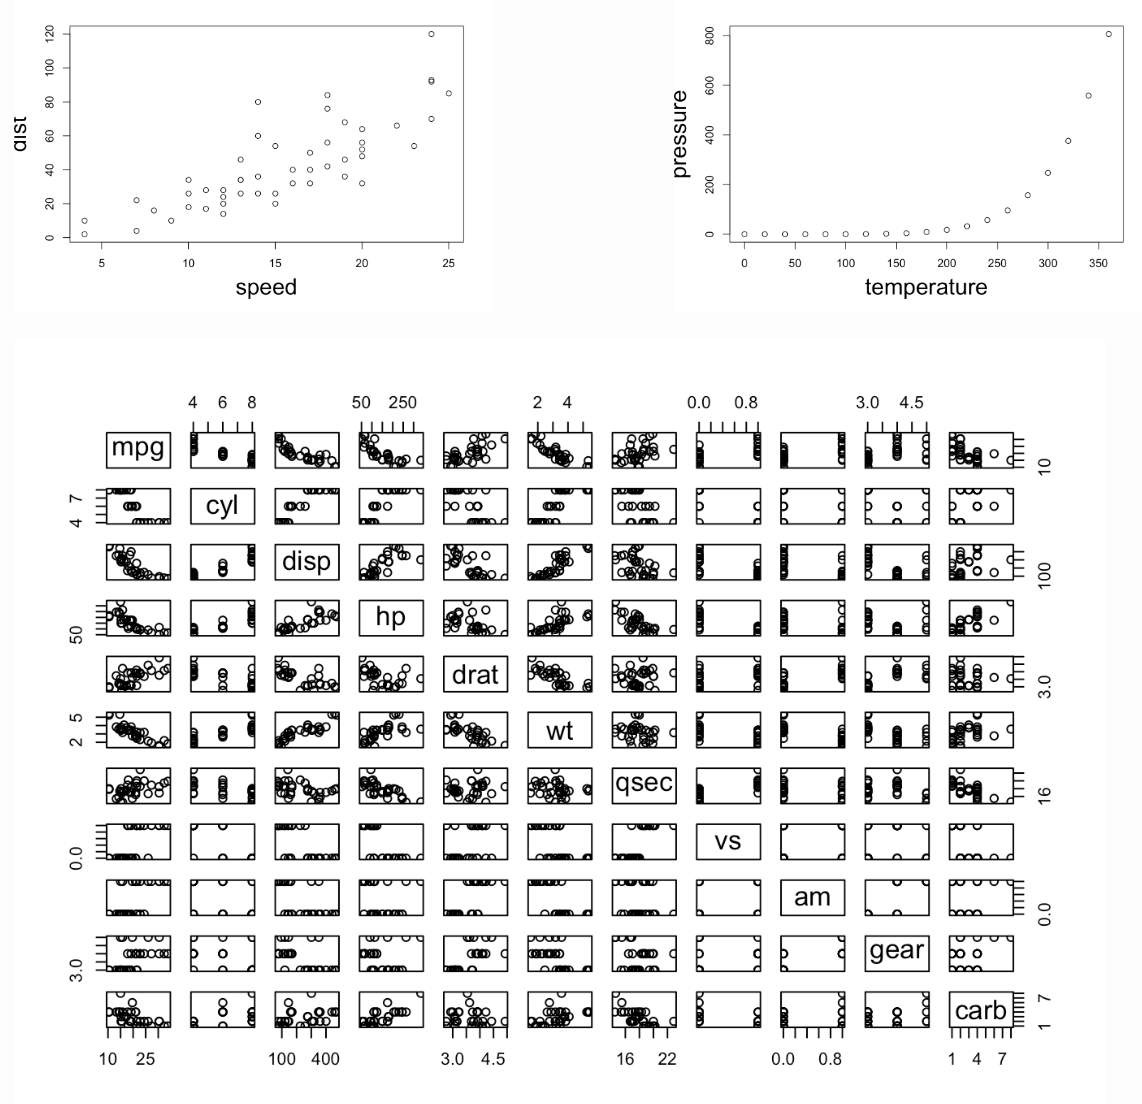 Two plots arranged side-by-side with a large plot underneath it. The top two plots are scatter plots visualizing the `cars` and `pressure` datasets. These two plots are separated by some additional white space. The plot on the bottom visualizes the `mtcars` dataset and is wider and taller than the other two plots combined. This plot is an 11 by 11 grid plotting each of the 11 variables in the `mtcars` dataset against each other as a scatterplot. Instead of scatter plots in the diagonal starting in the upper left and going to the lower right are text labels for each of the variable names. These are: 'mpg', 'cyl', 'disp', 'hp', 'drat', 'wt', 'qsec', 'vs', 'am', 'gear', and 'carb'.